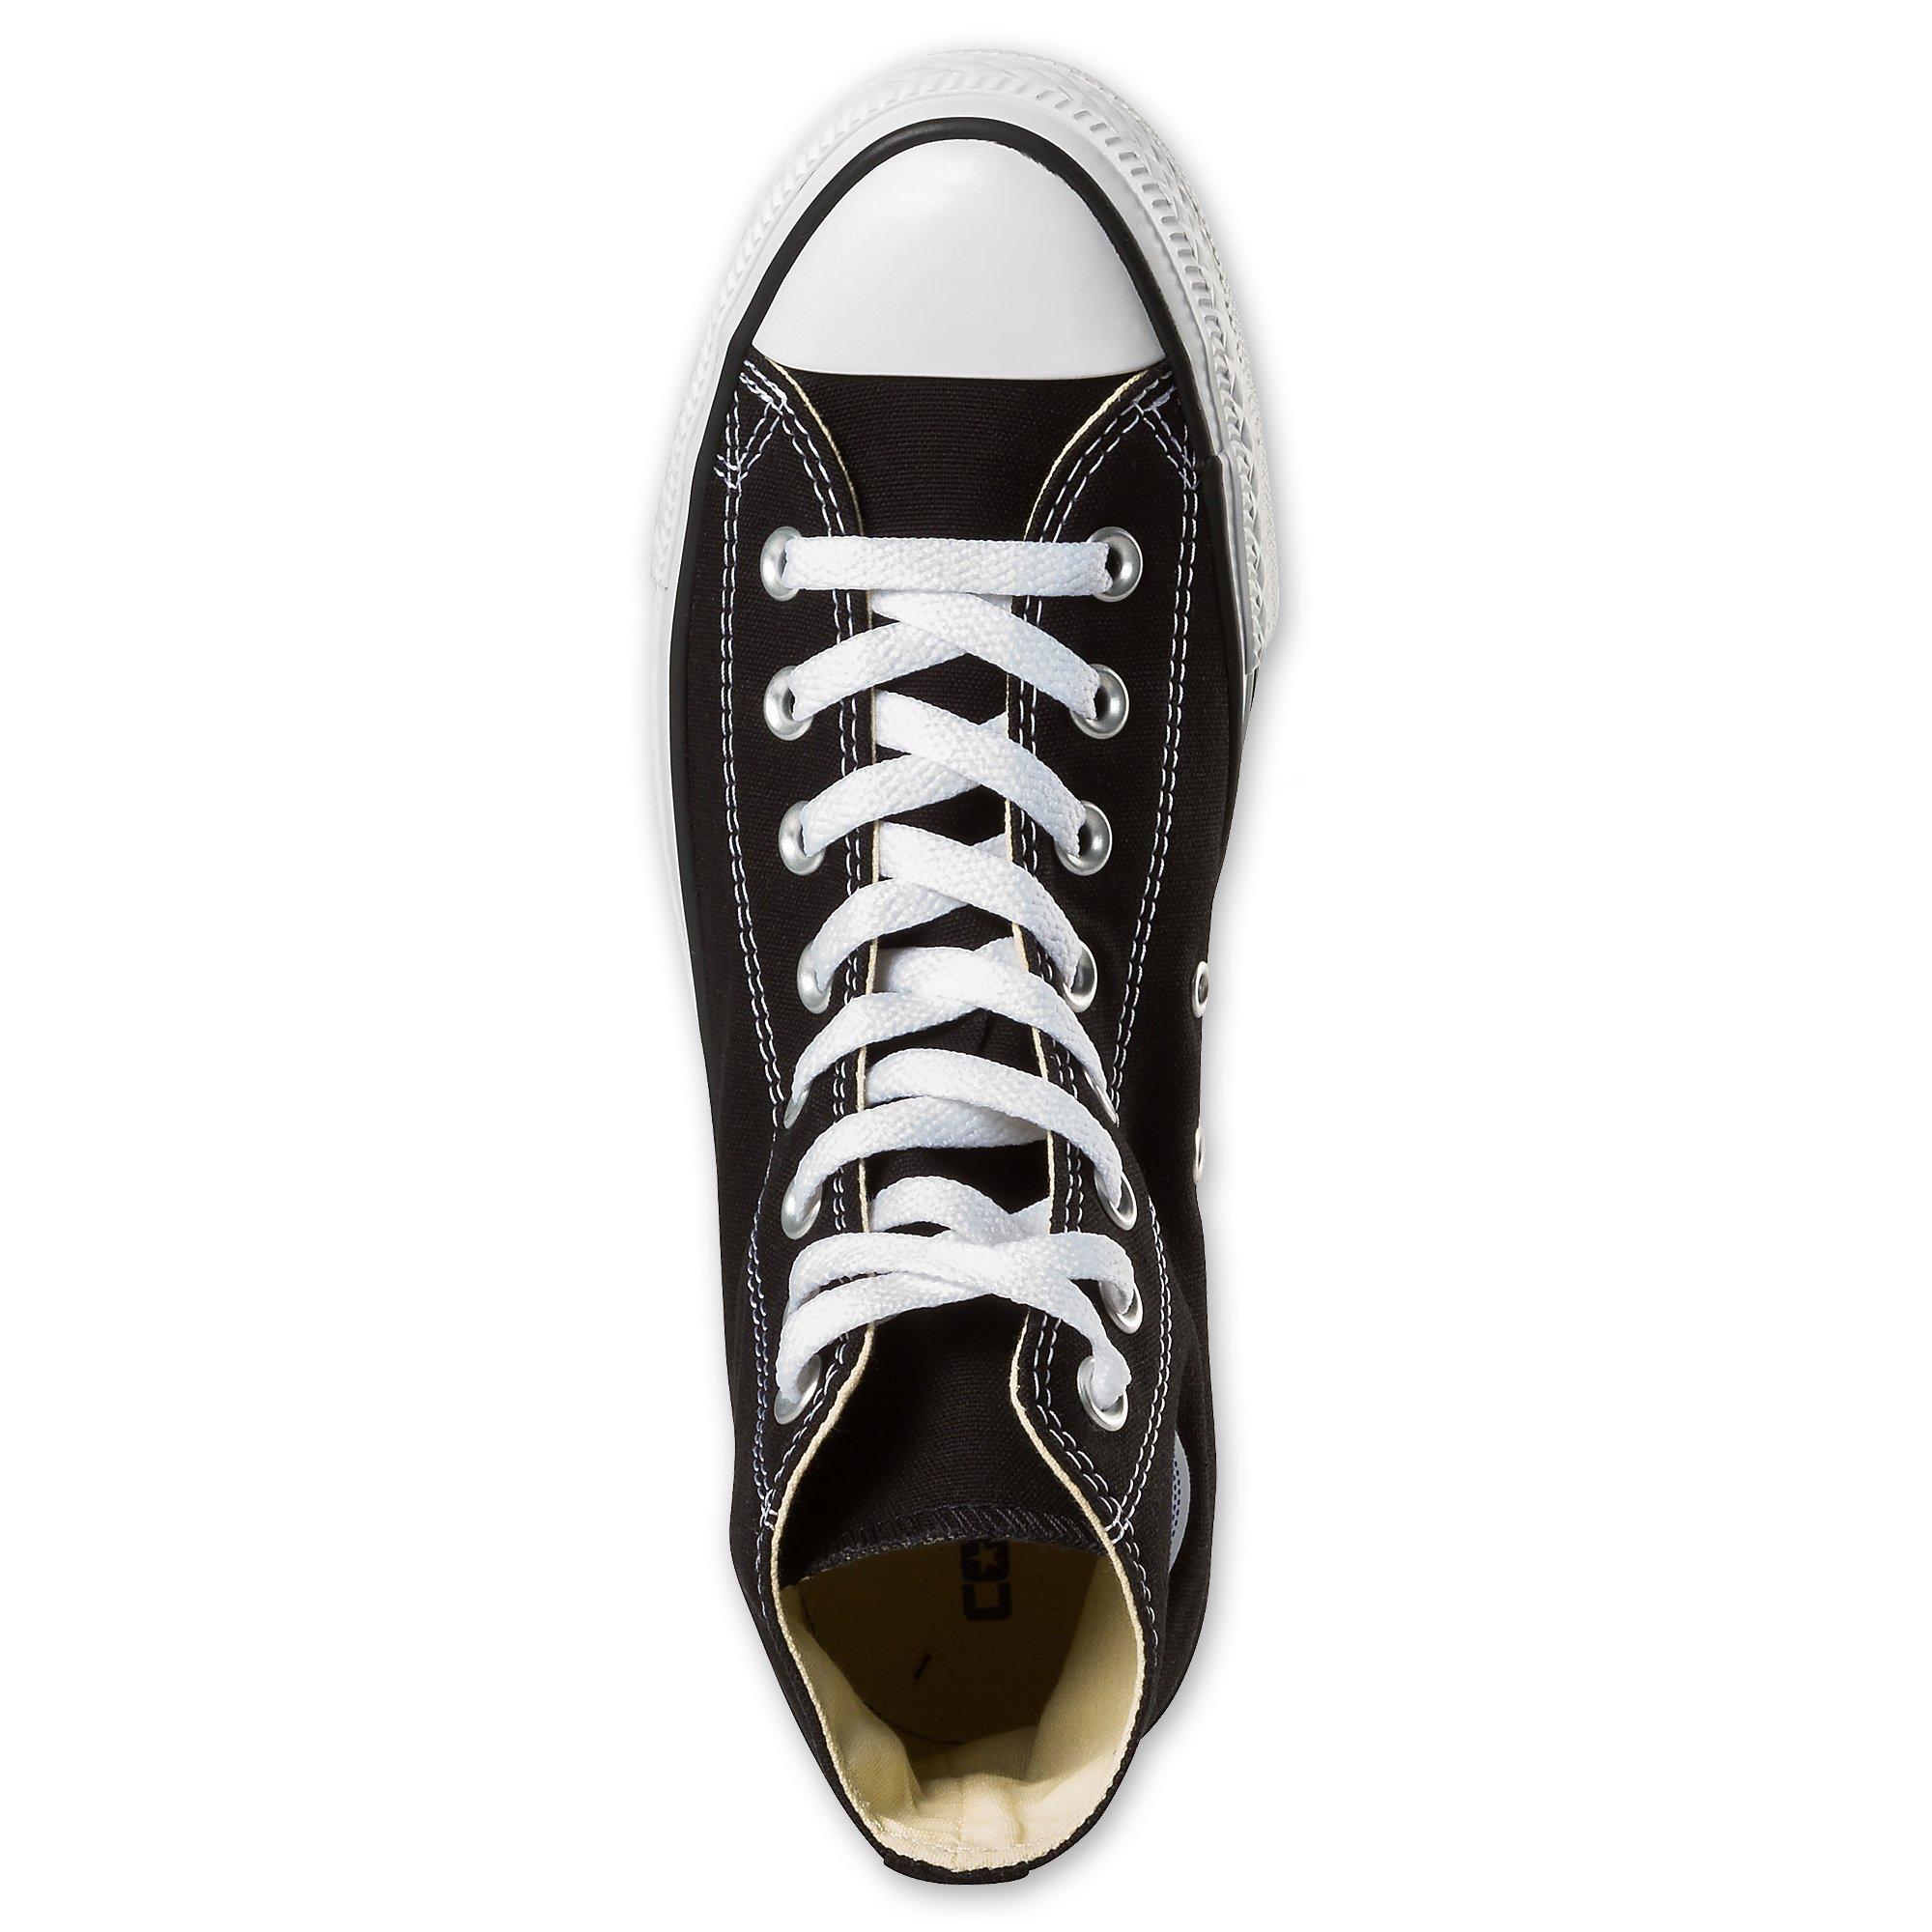 CONVERSE Chuck Taylor All Star Sneakers, High Top 